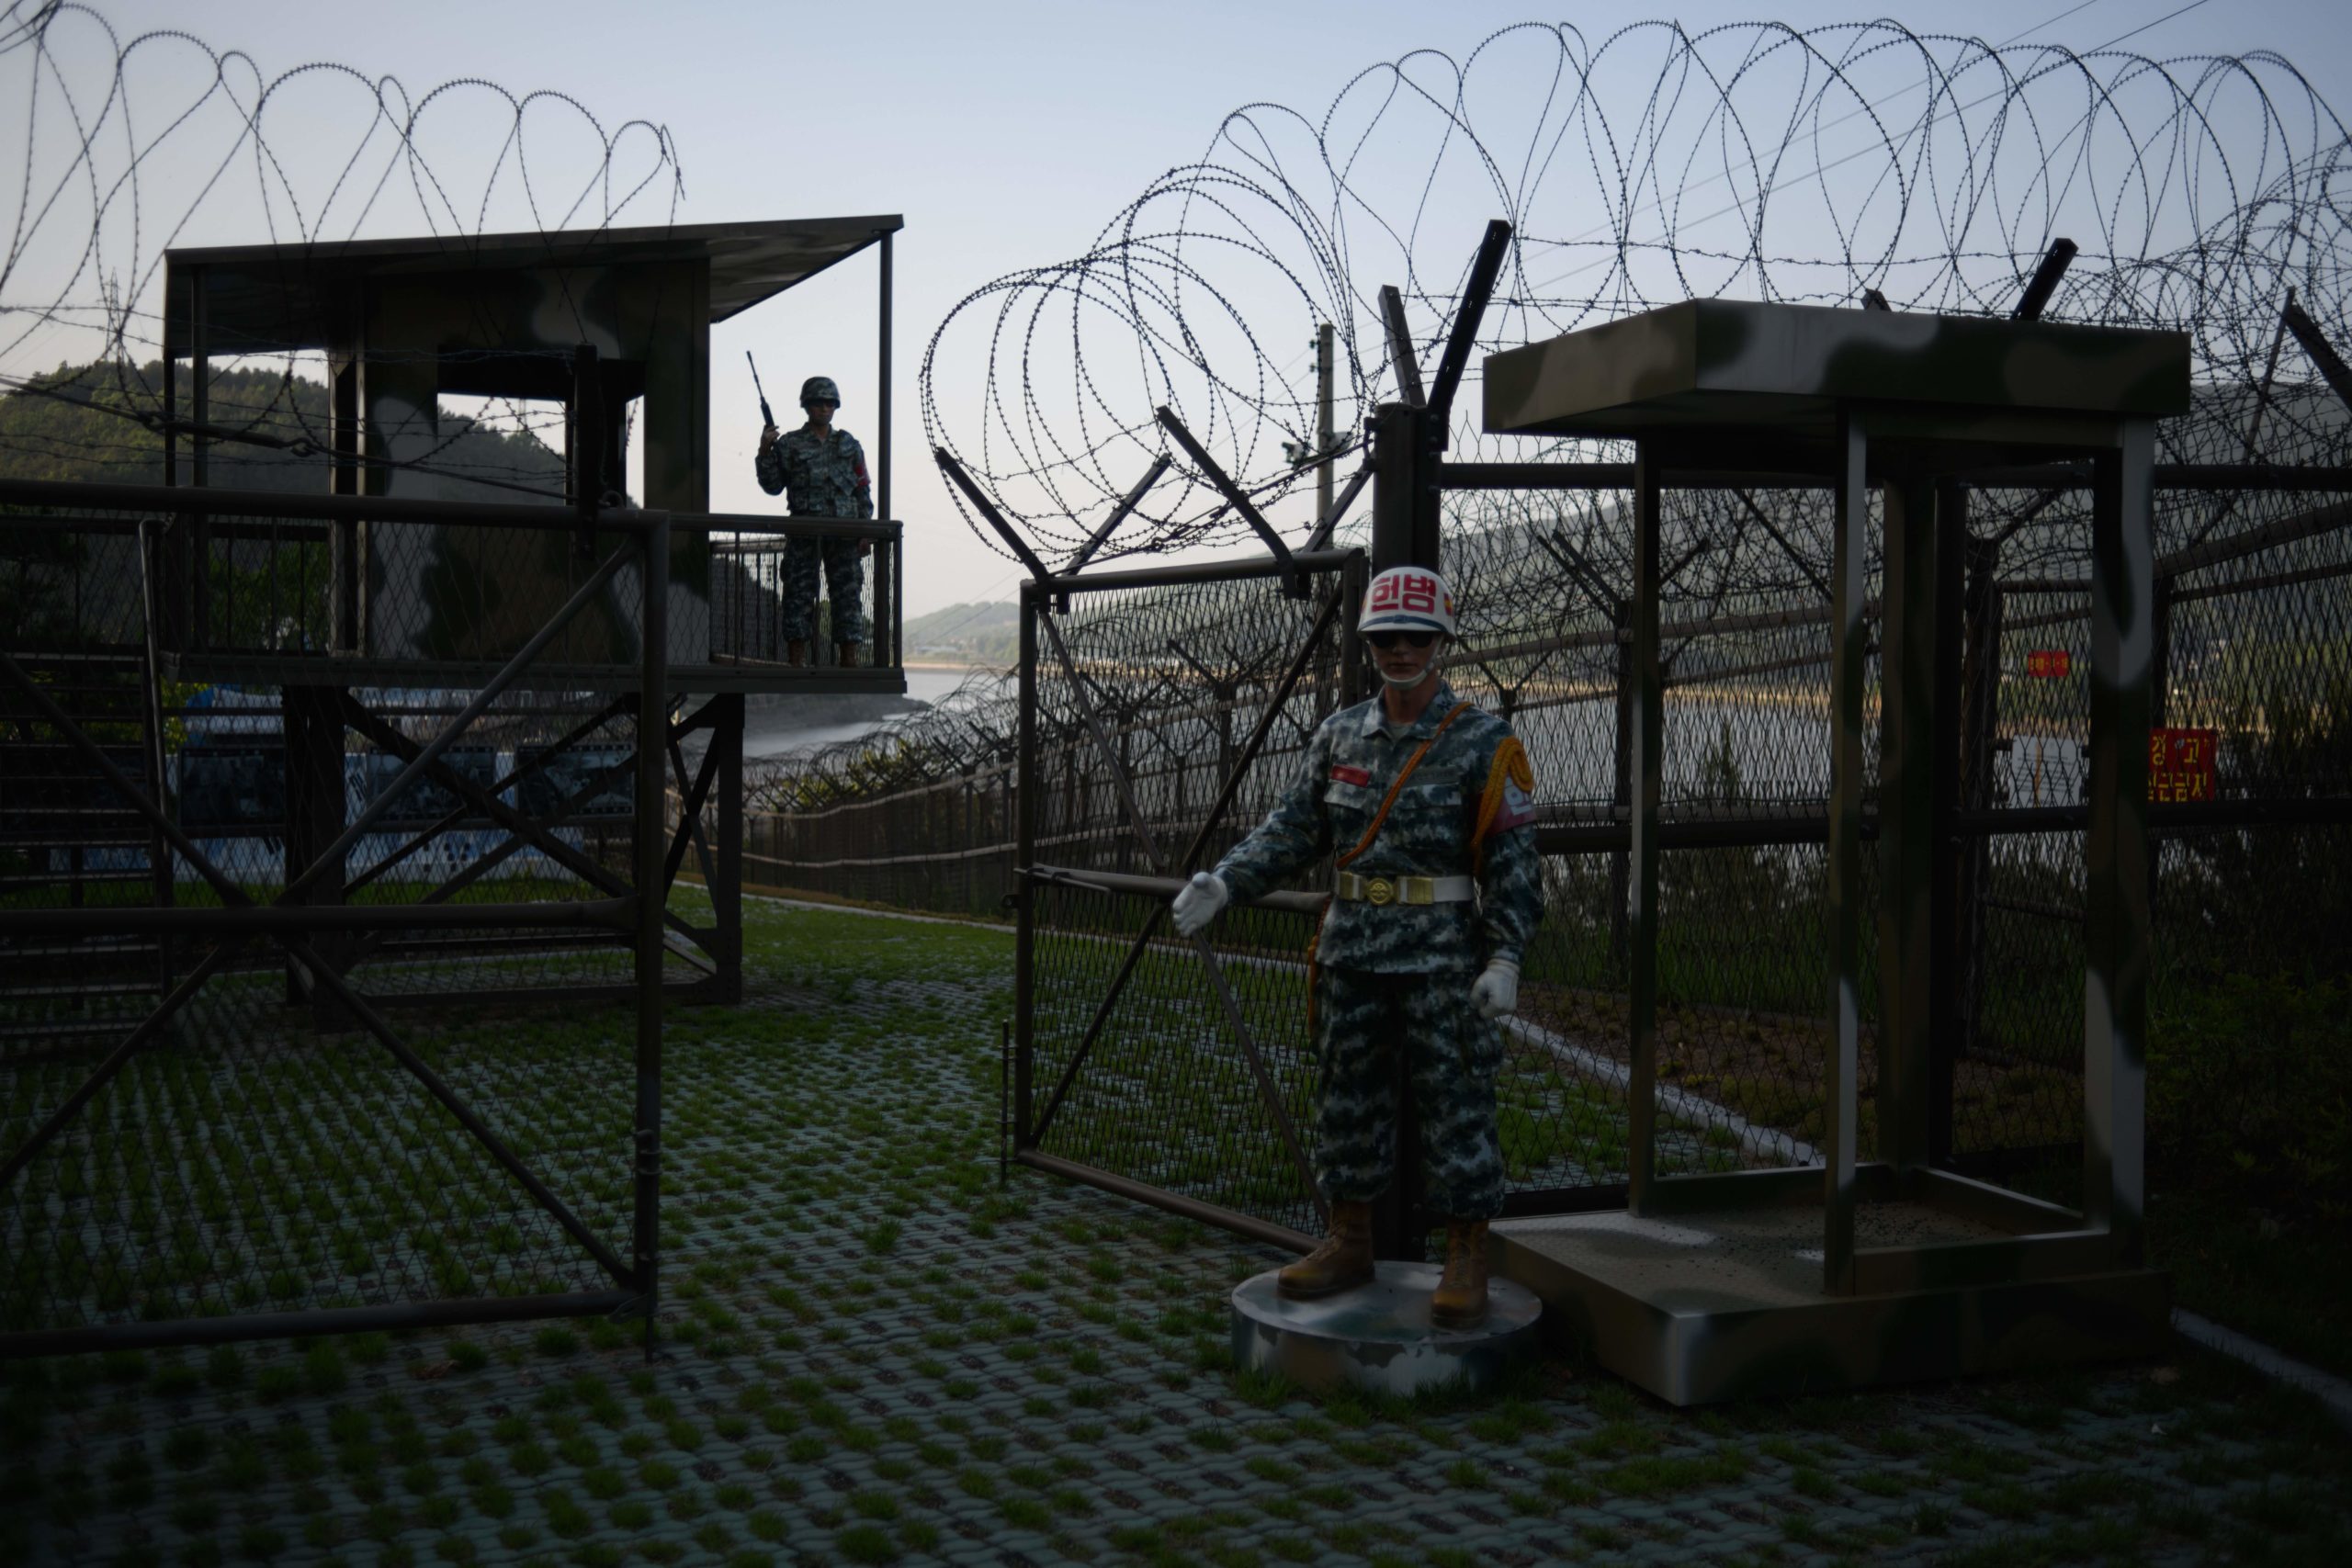 Mannequins of South Korean soldiers stand before a guard post open to visitors, beside the barbed wire fence of the Demilitarized Zone (DMZ) between North and South Korea on Ganghwa island on May 24, 2018. (ED JONES/AFP via Getty Images)